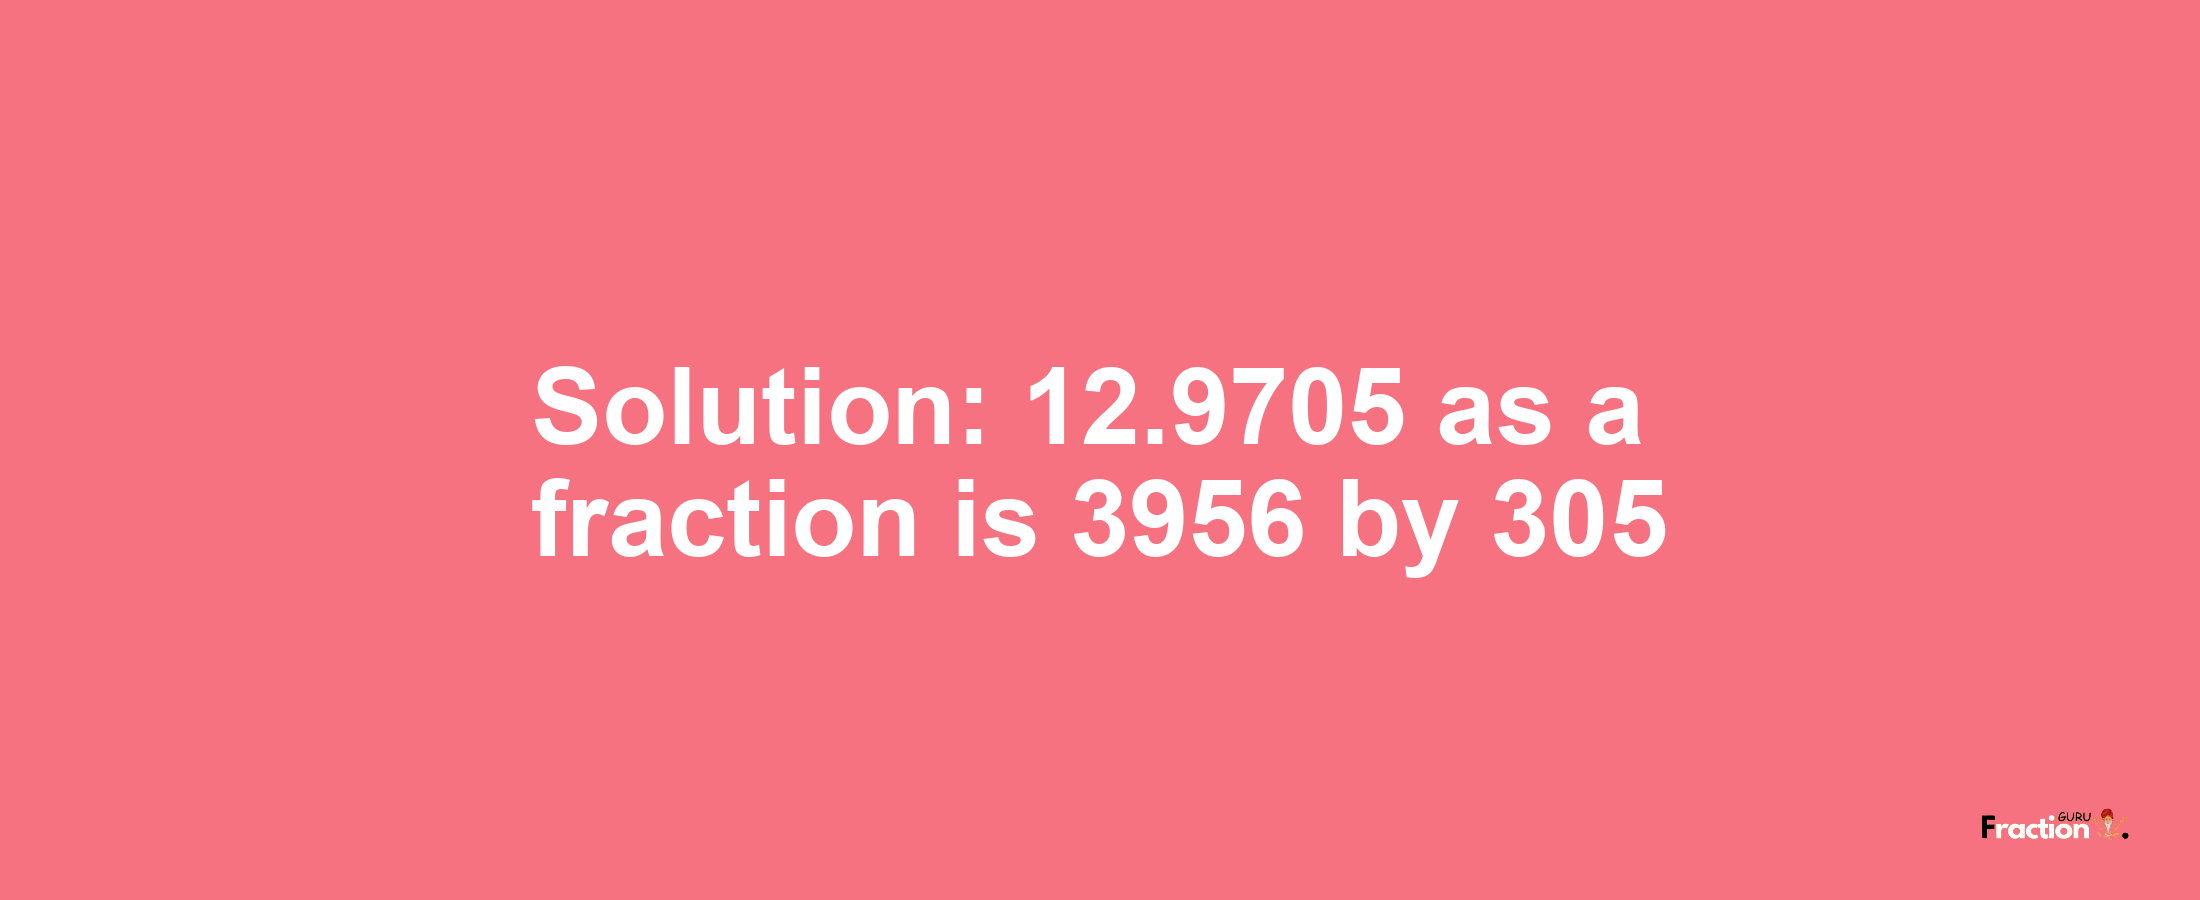 Solution:12.9705 as a fraction is 3956/305